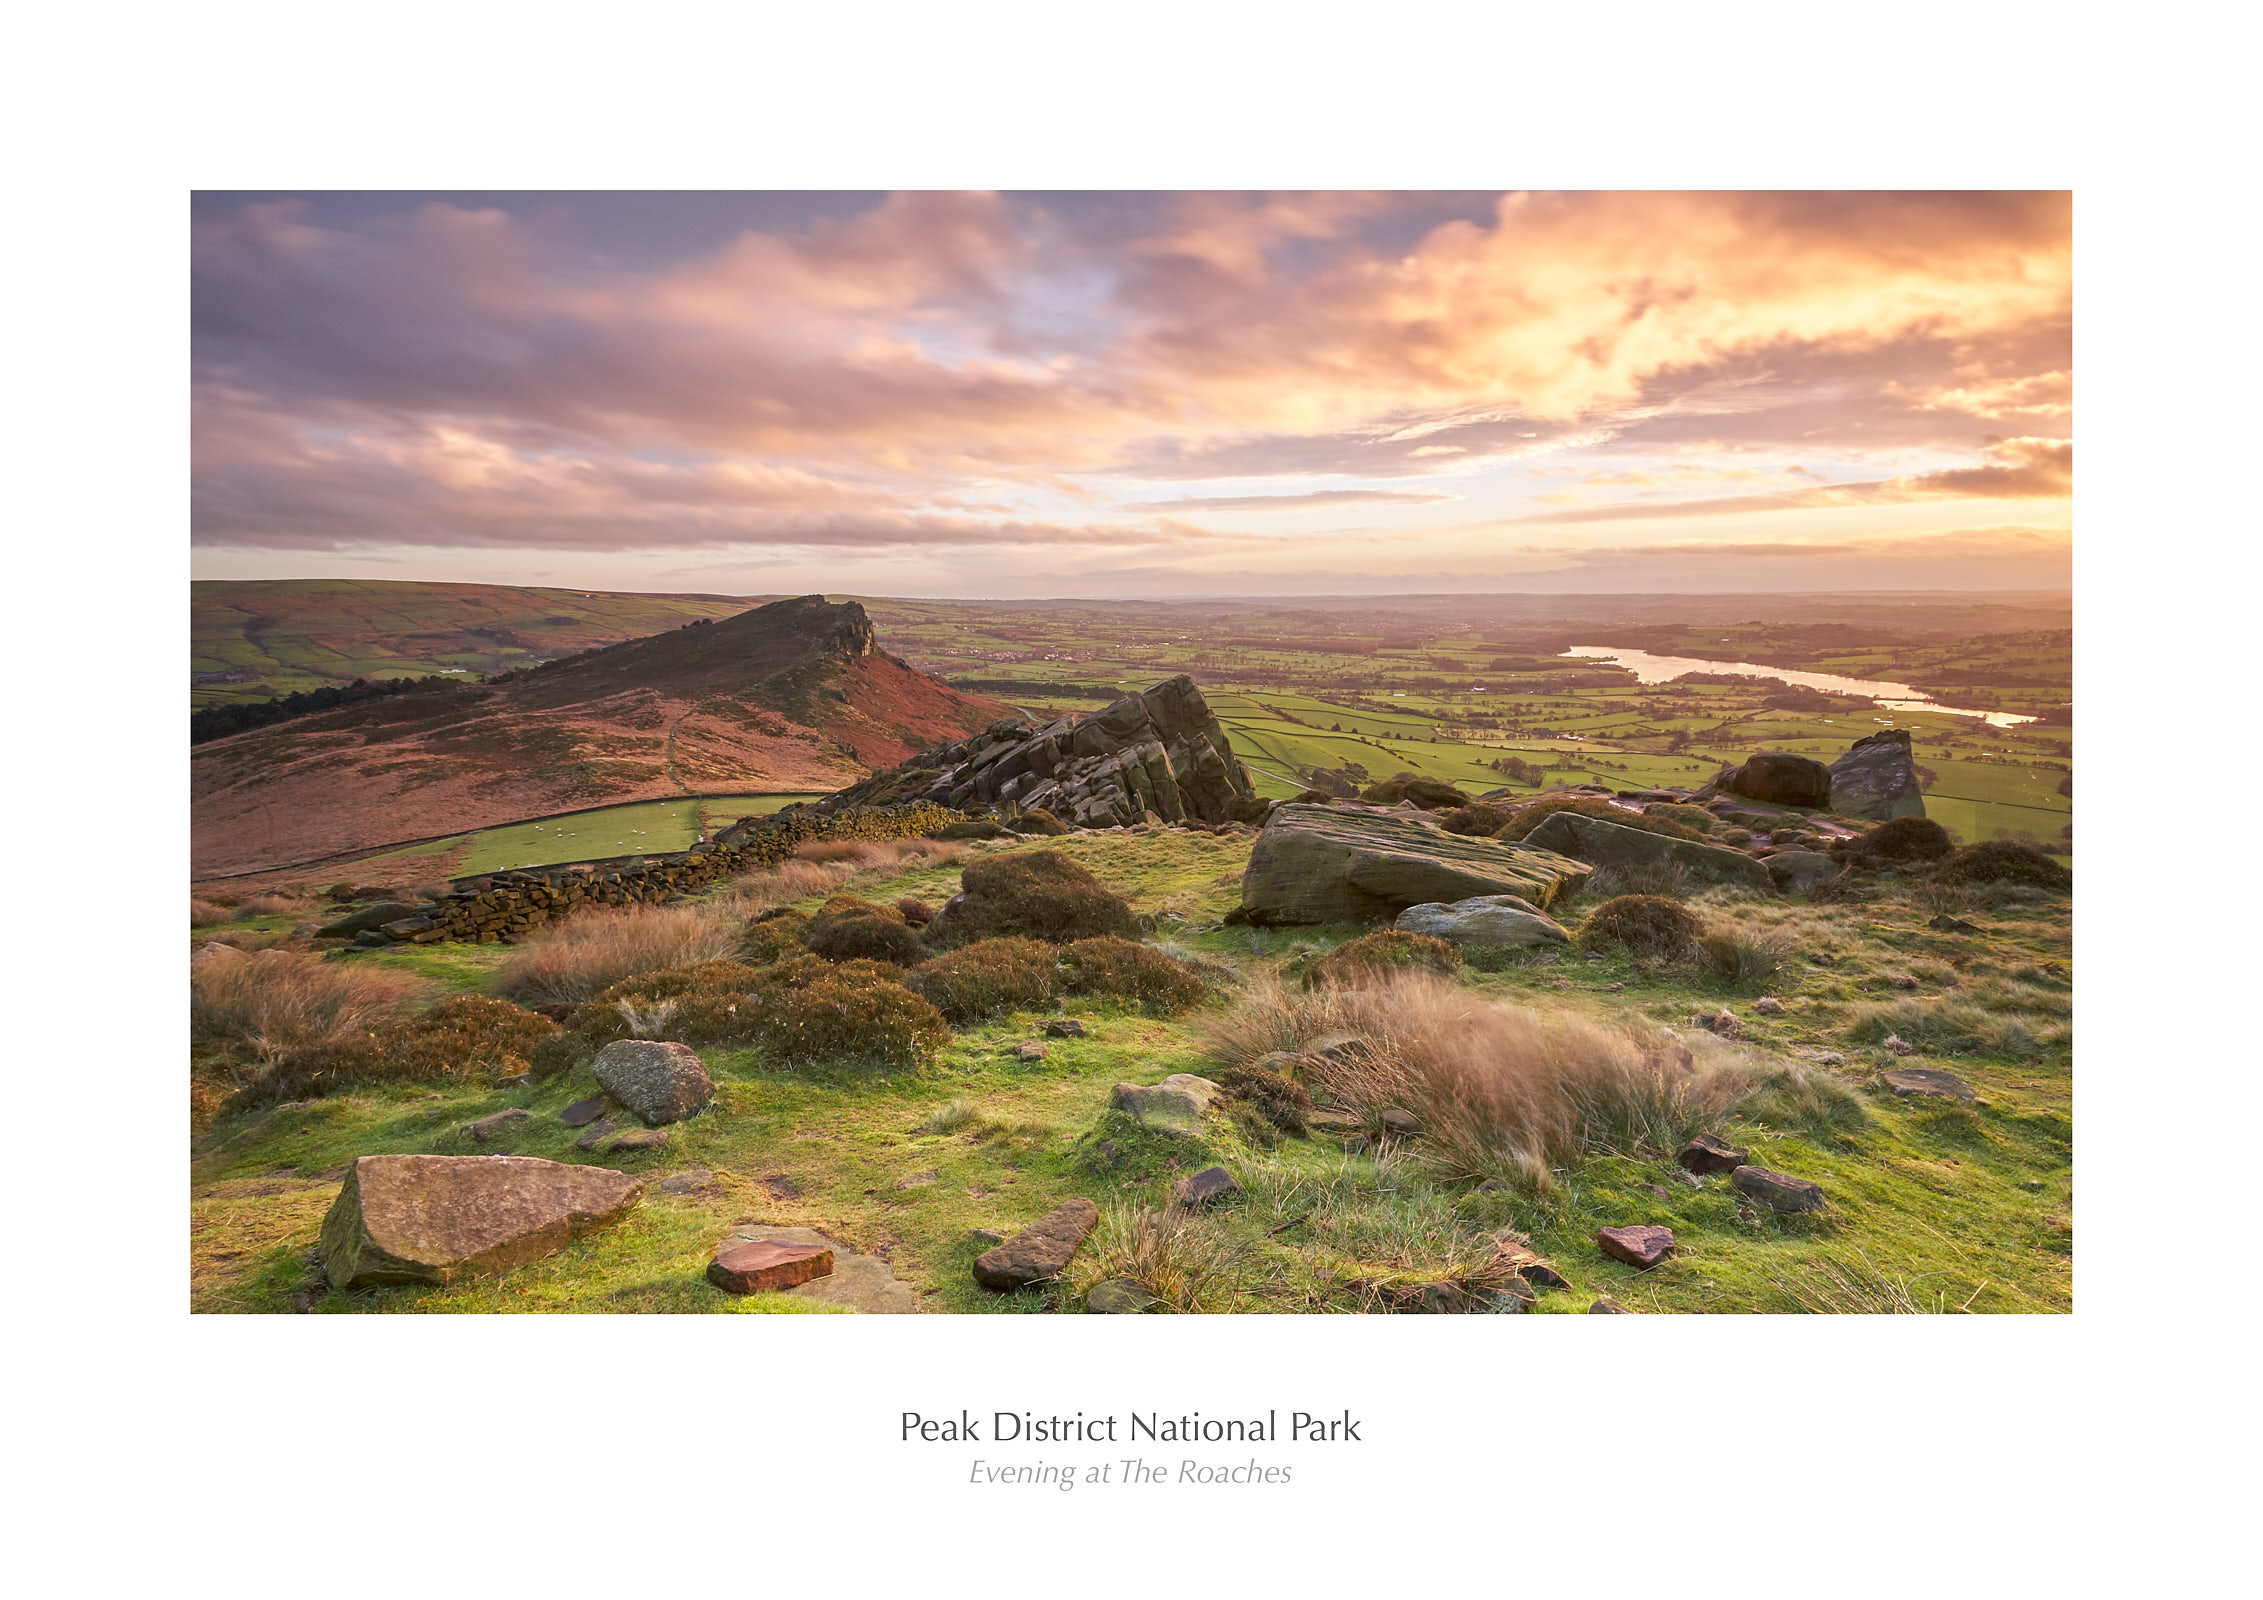 Evening at The Roaches